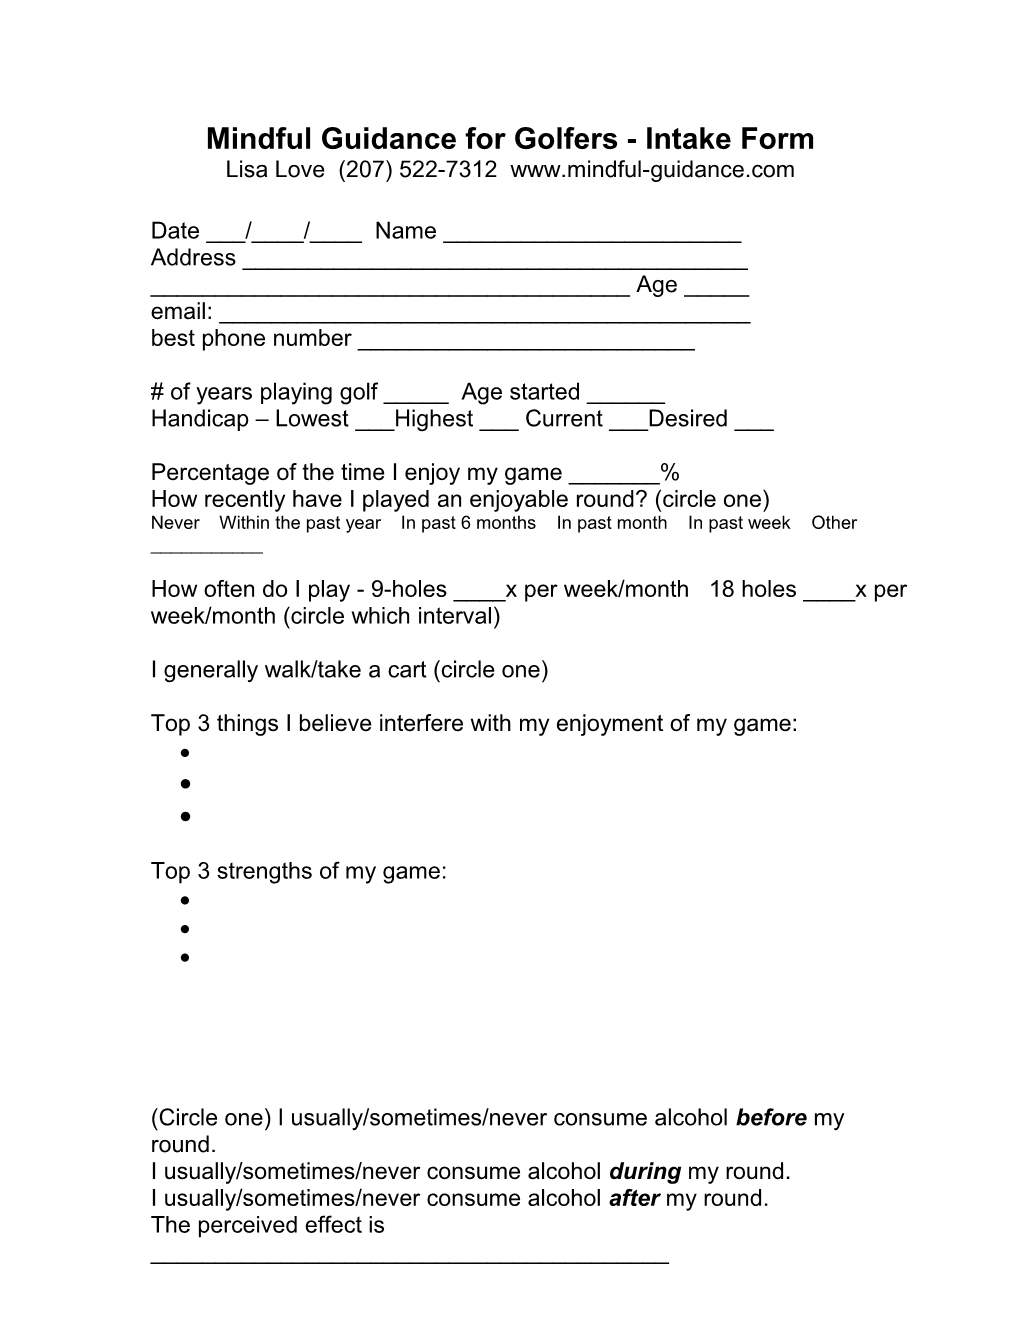 Mindful Guidance for Golfers - Intake Form